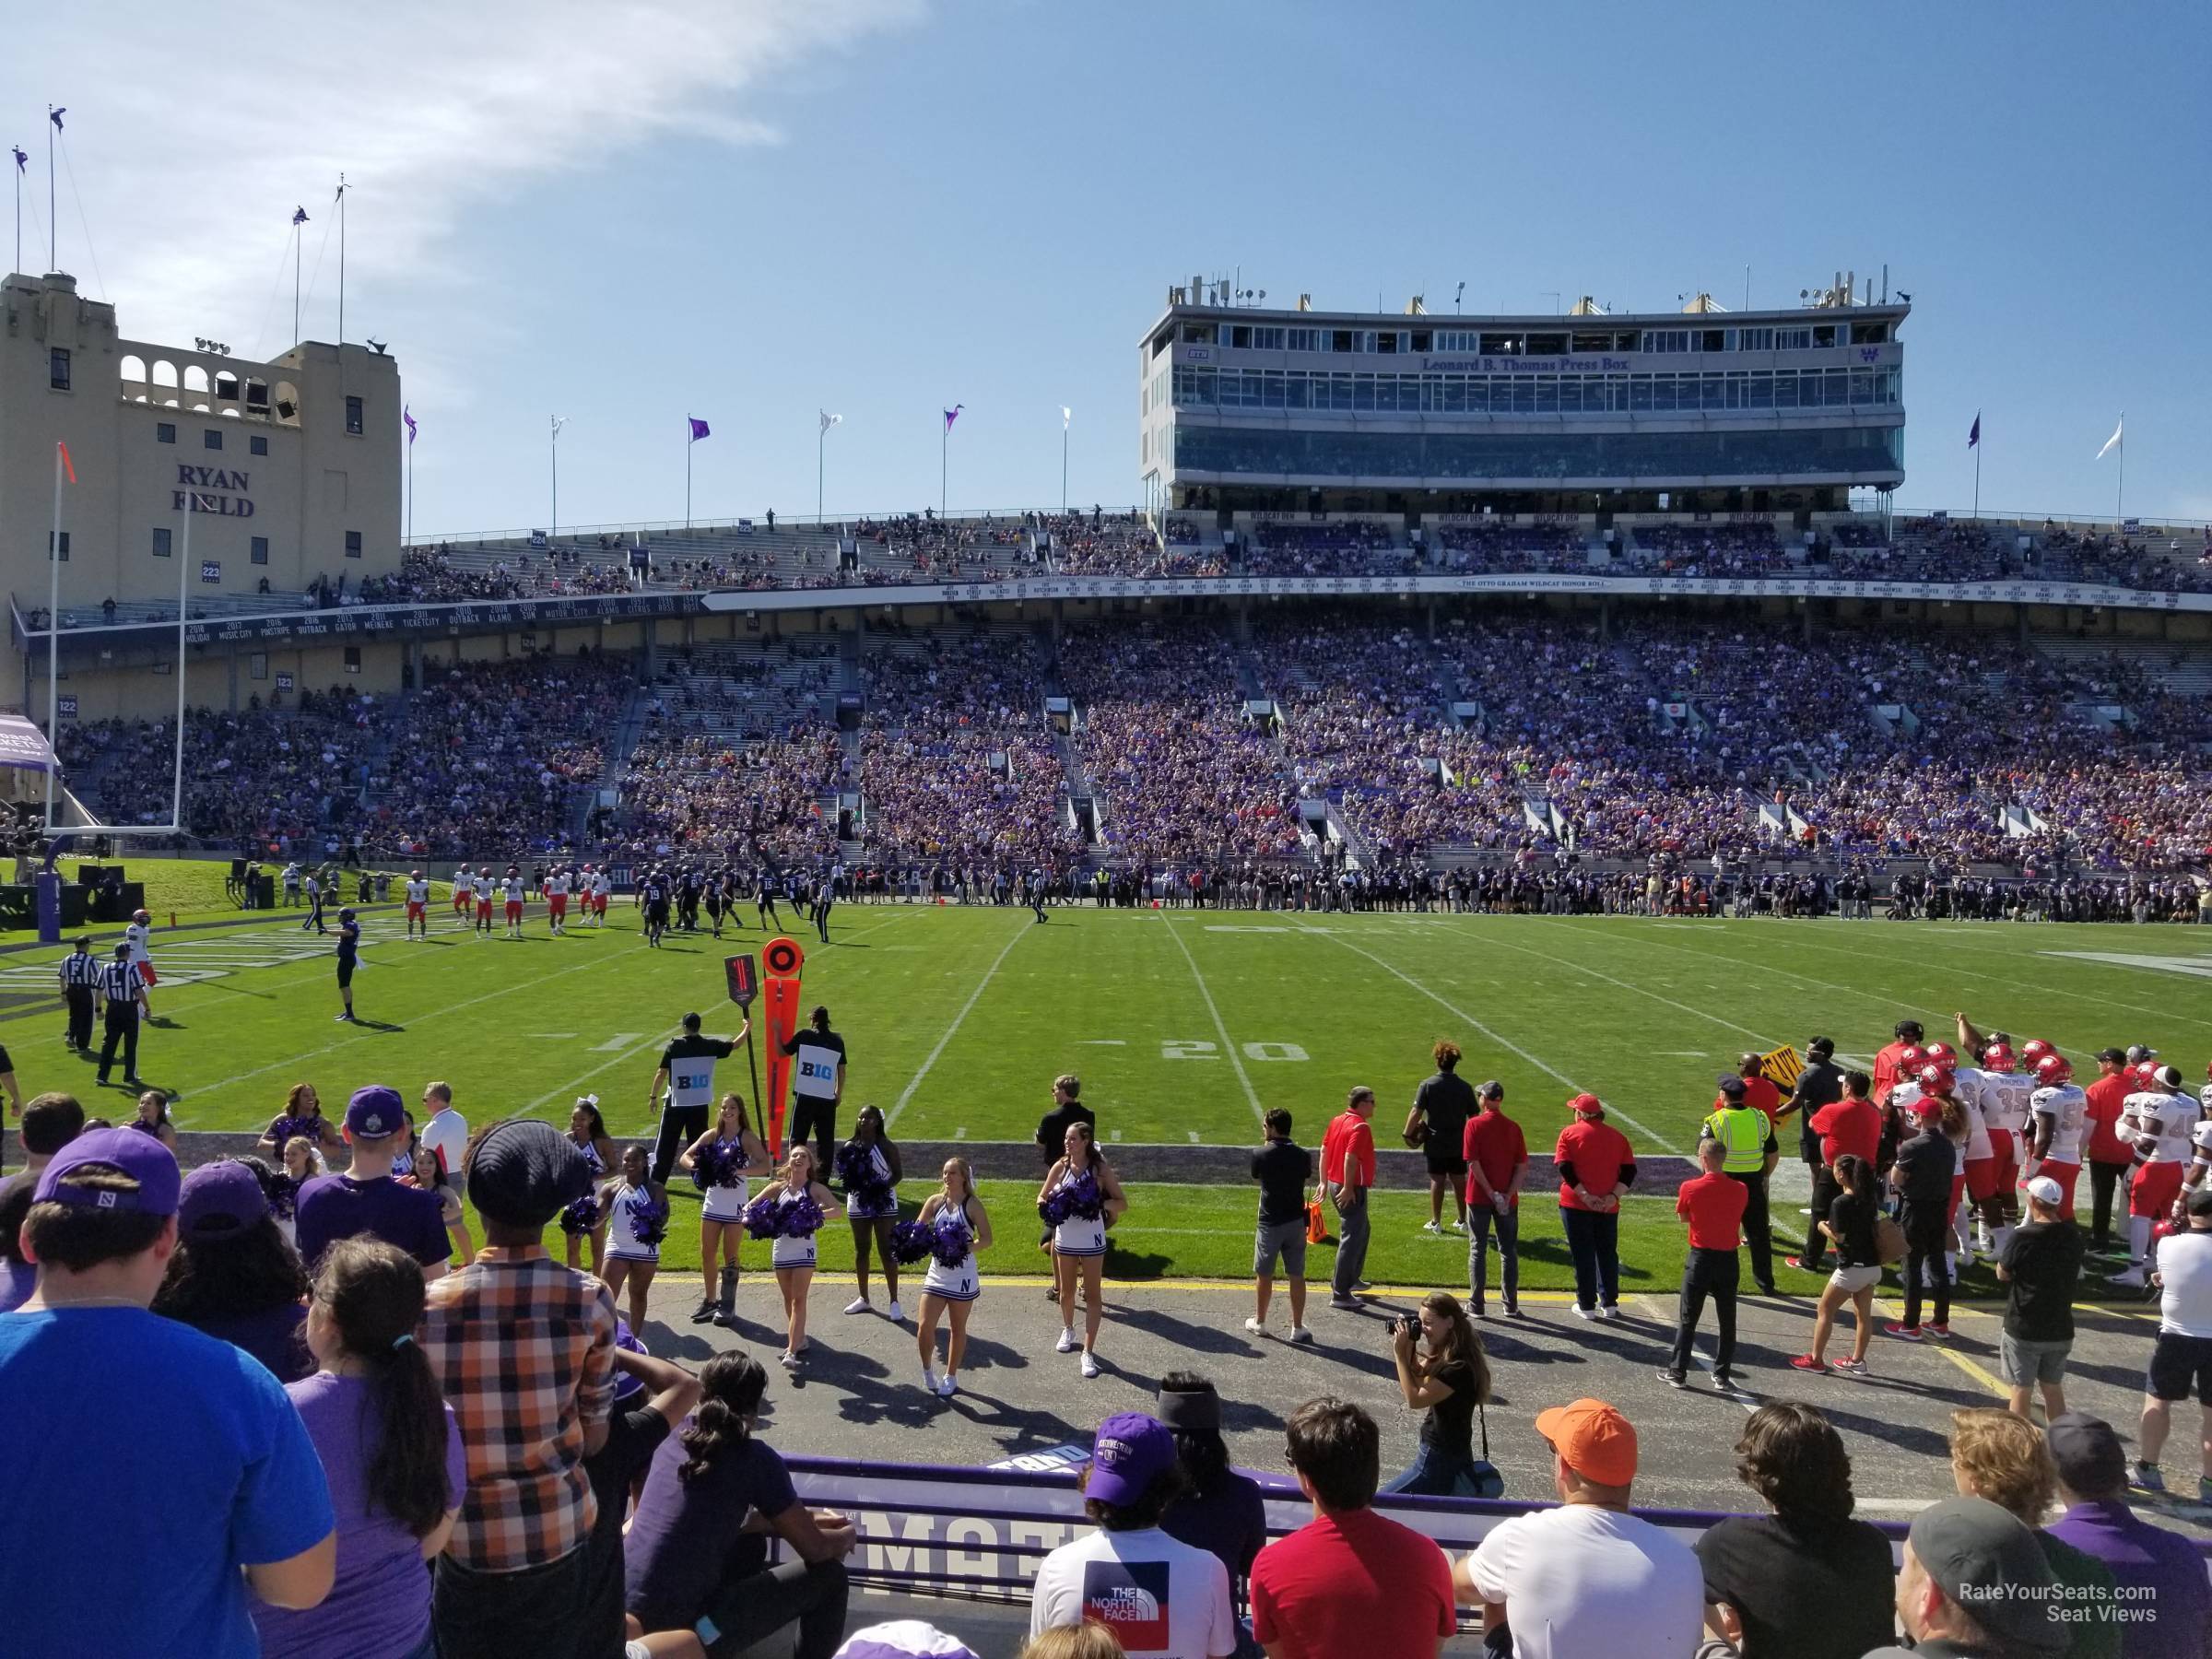 section 110, row 8 seat view  - ryan field